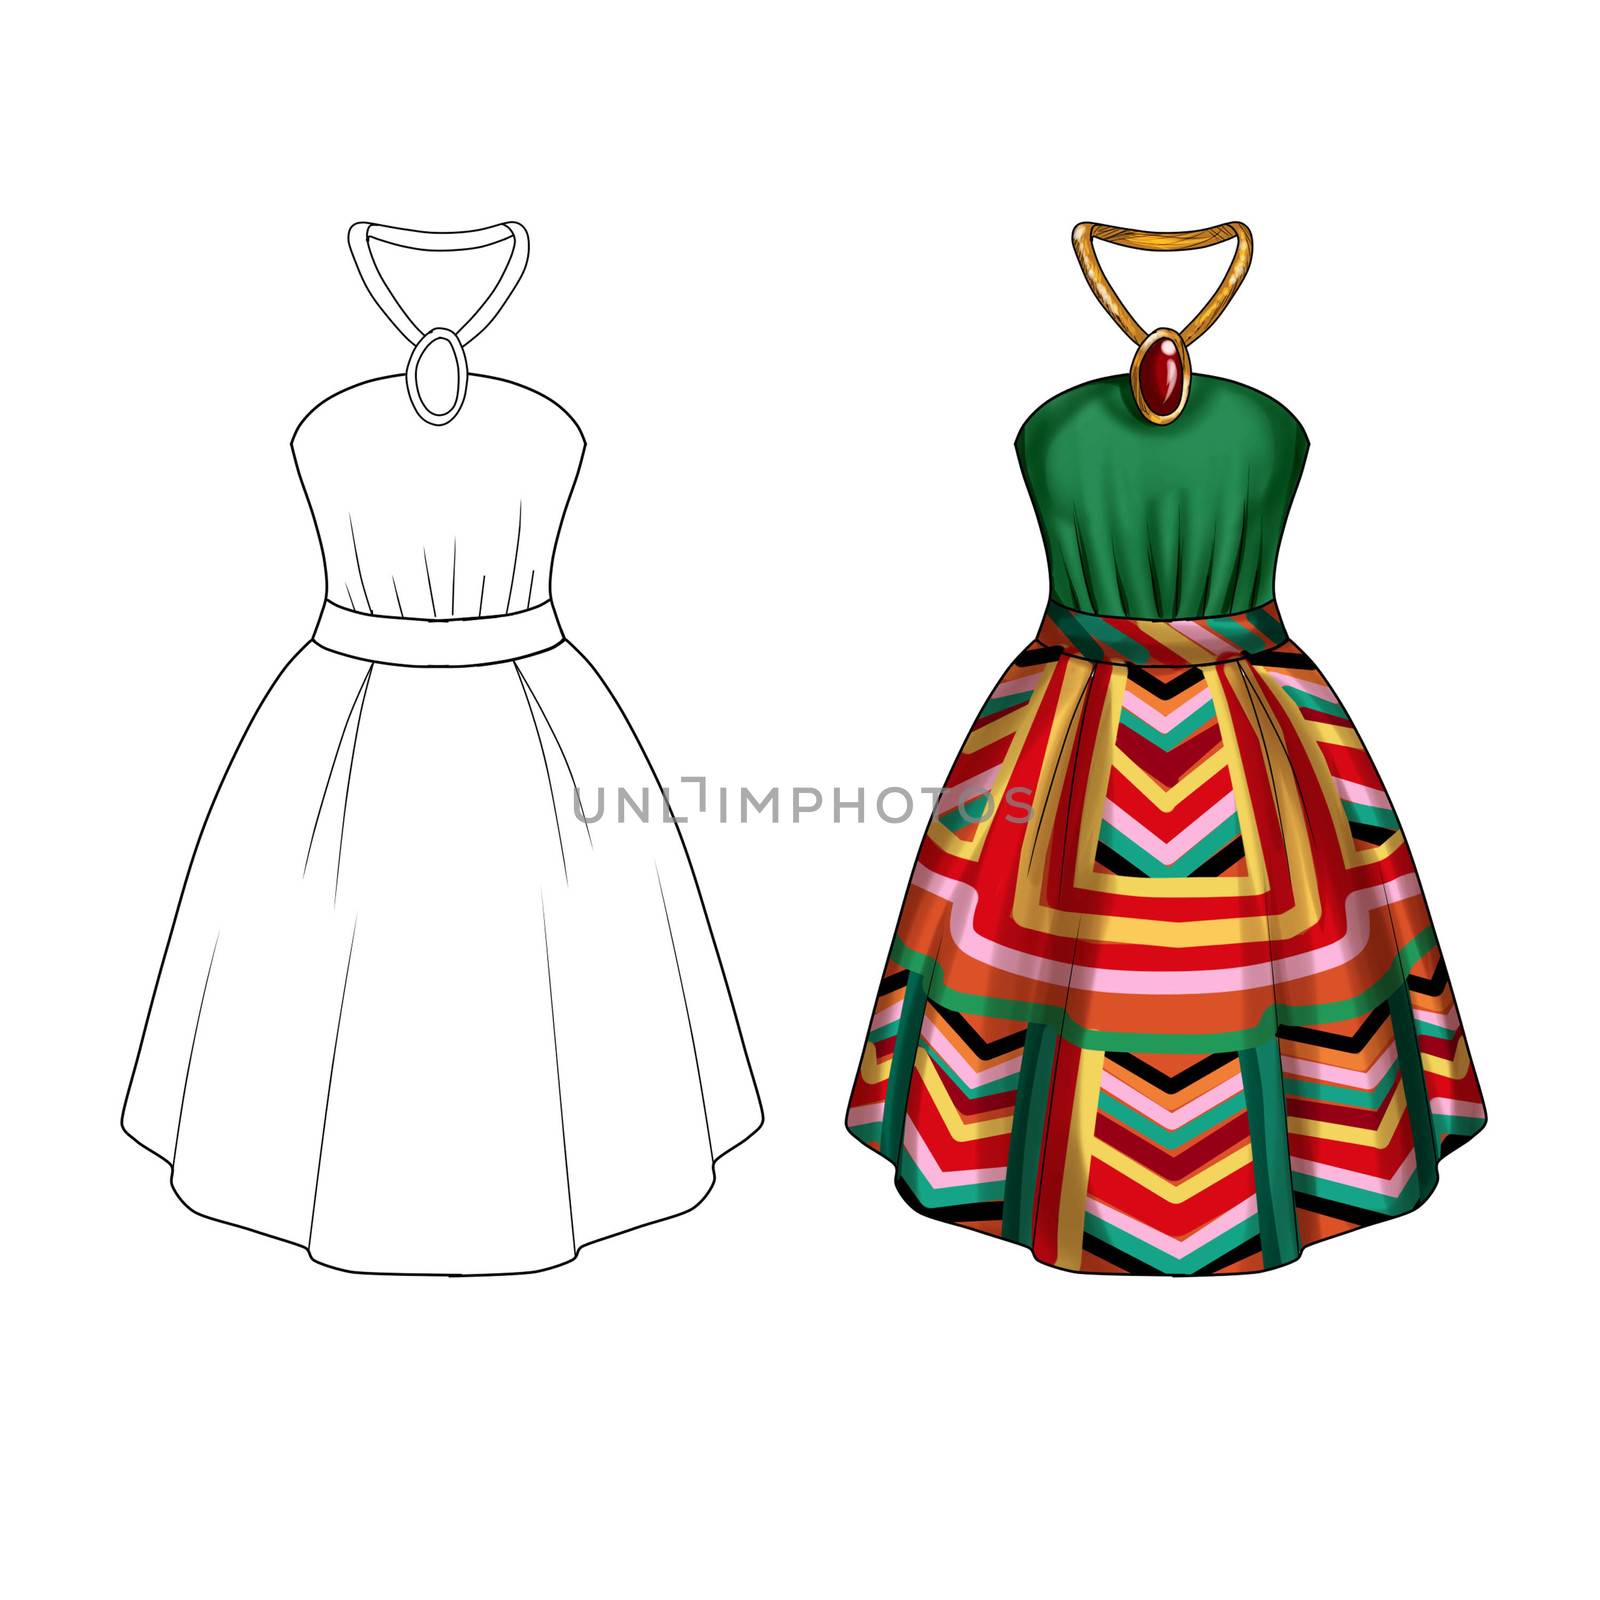 Flat Fashion Template Illustration - Party dress with collar tie and wide skirt in printed geometrical fabric